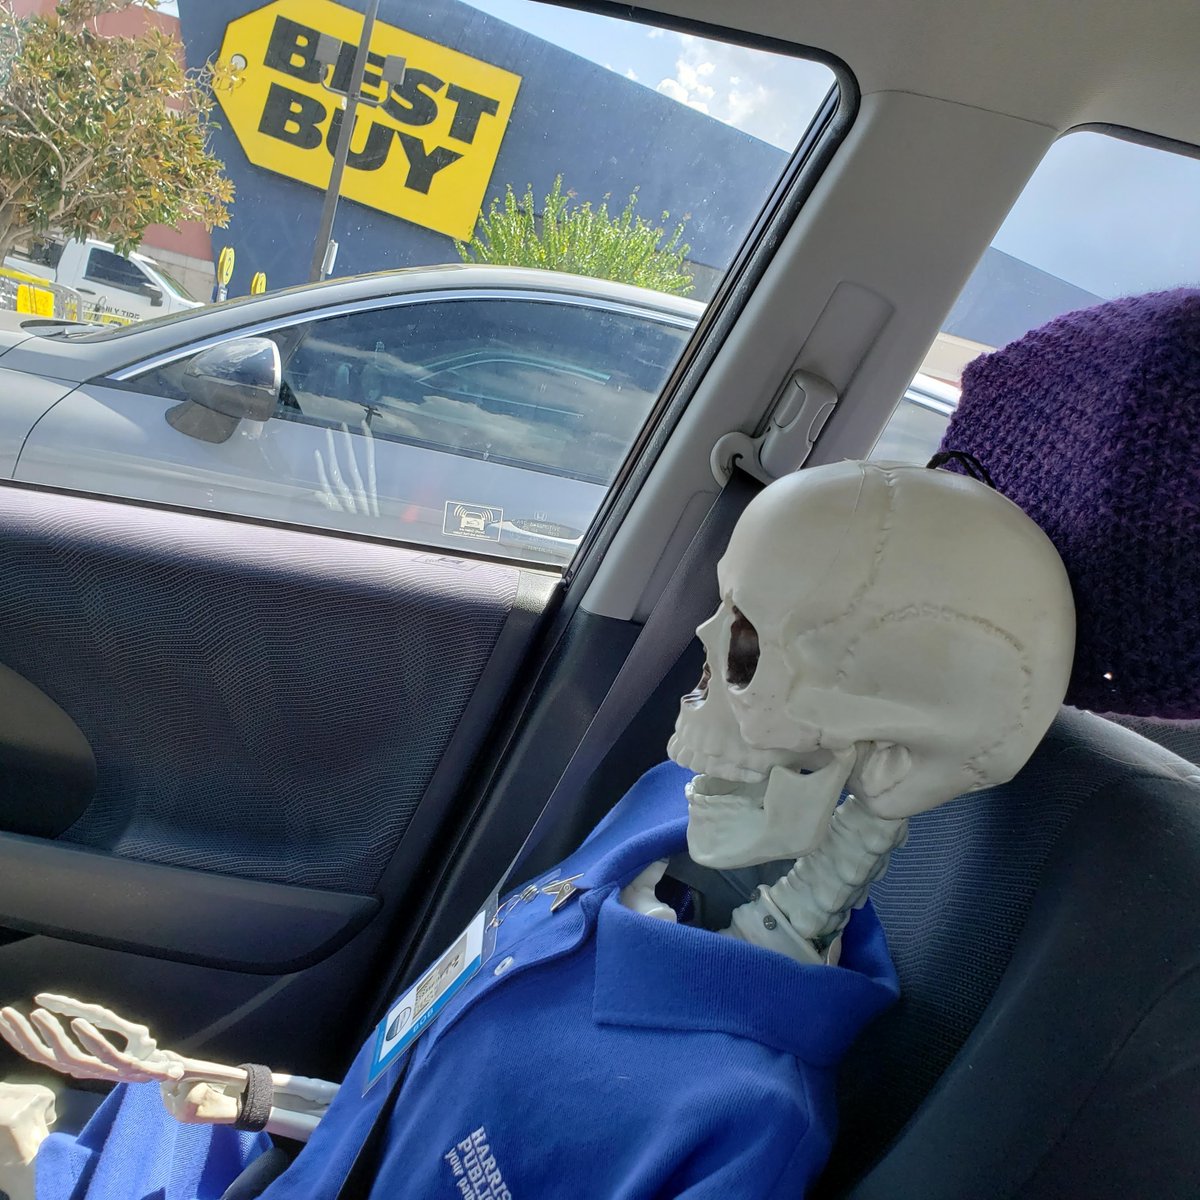 It may by Thursday but it's Happy Fry-day for Bob who learned that the price of freedom means running errands with Miss Darla. 

#bobtoberfest #harriscountypl #bobtheskeleton #atascocita #atascocitatx #texaslibraries #halloween #skeleton #skeletons #atascocitalibrary